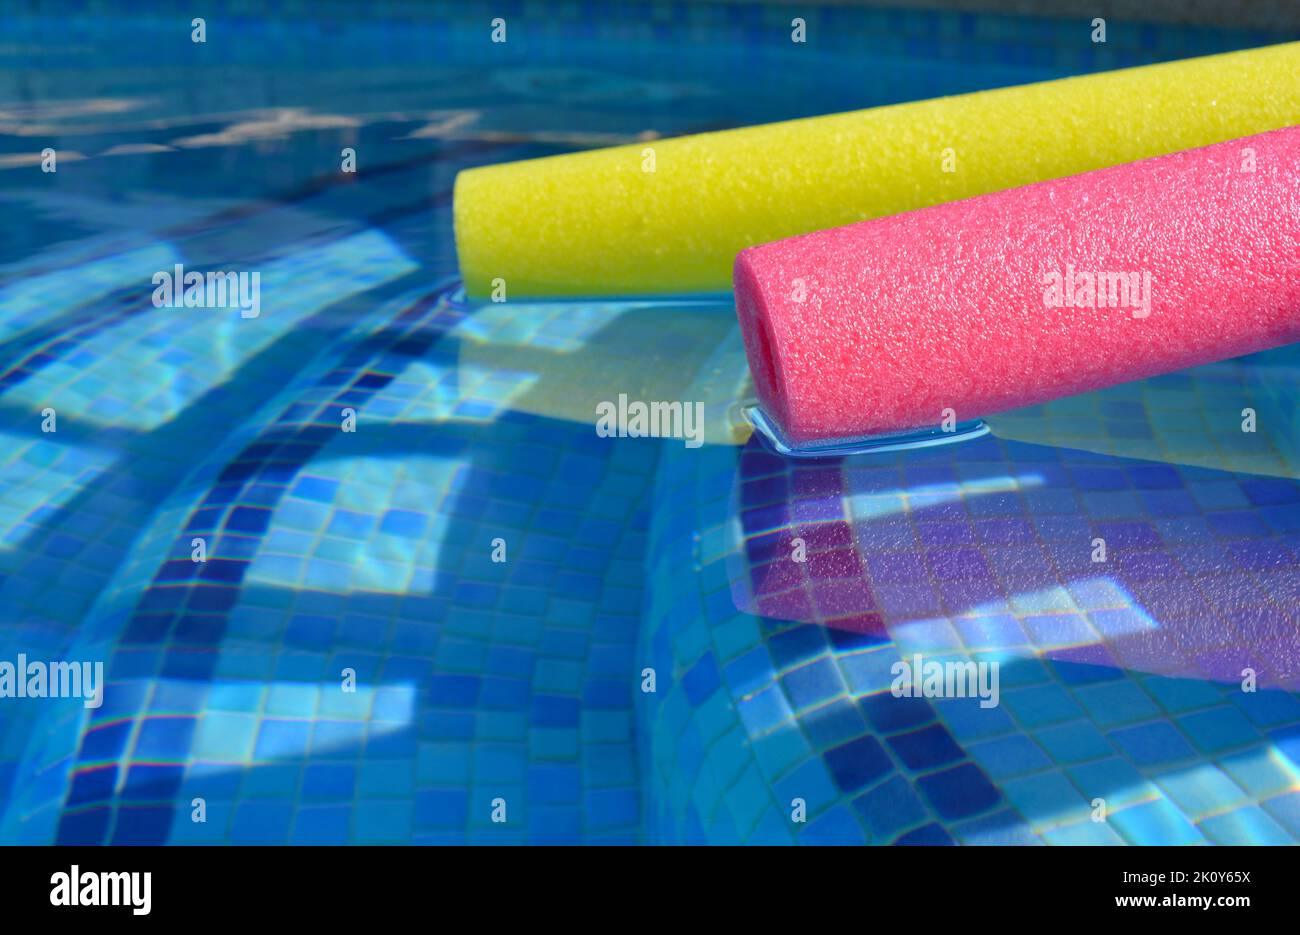 Swim noodles in blue tiled swimming pool, selective focus on pink polyethylene foam Stock Photo